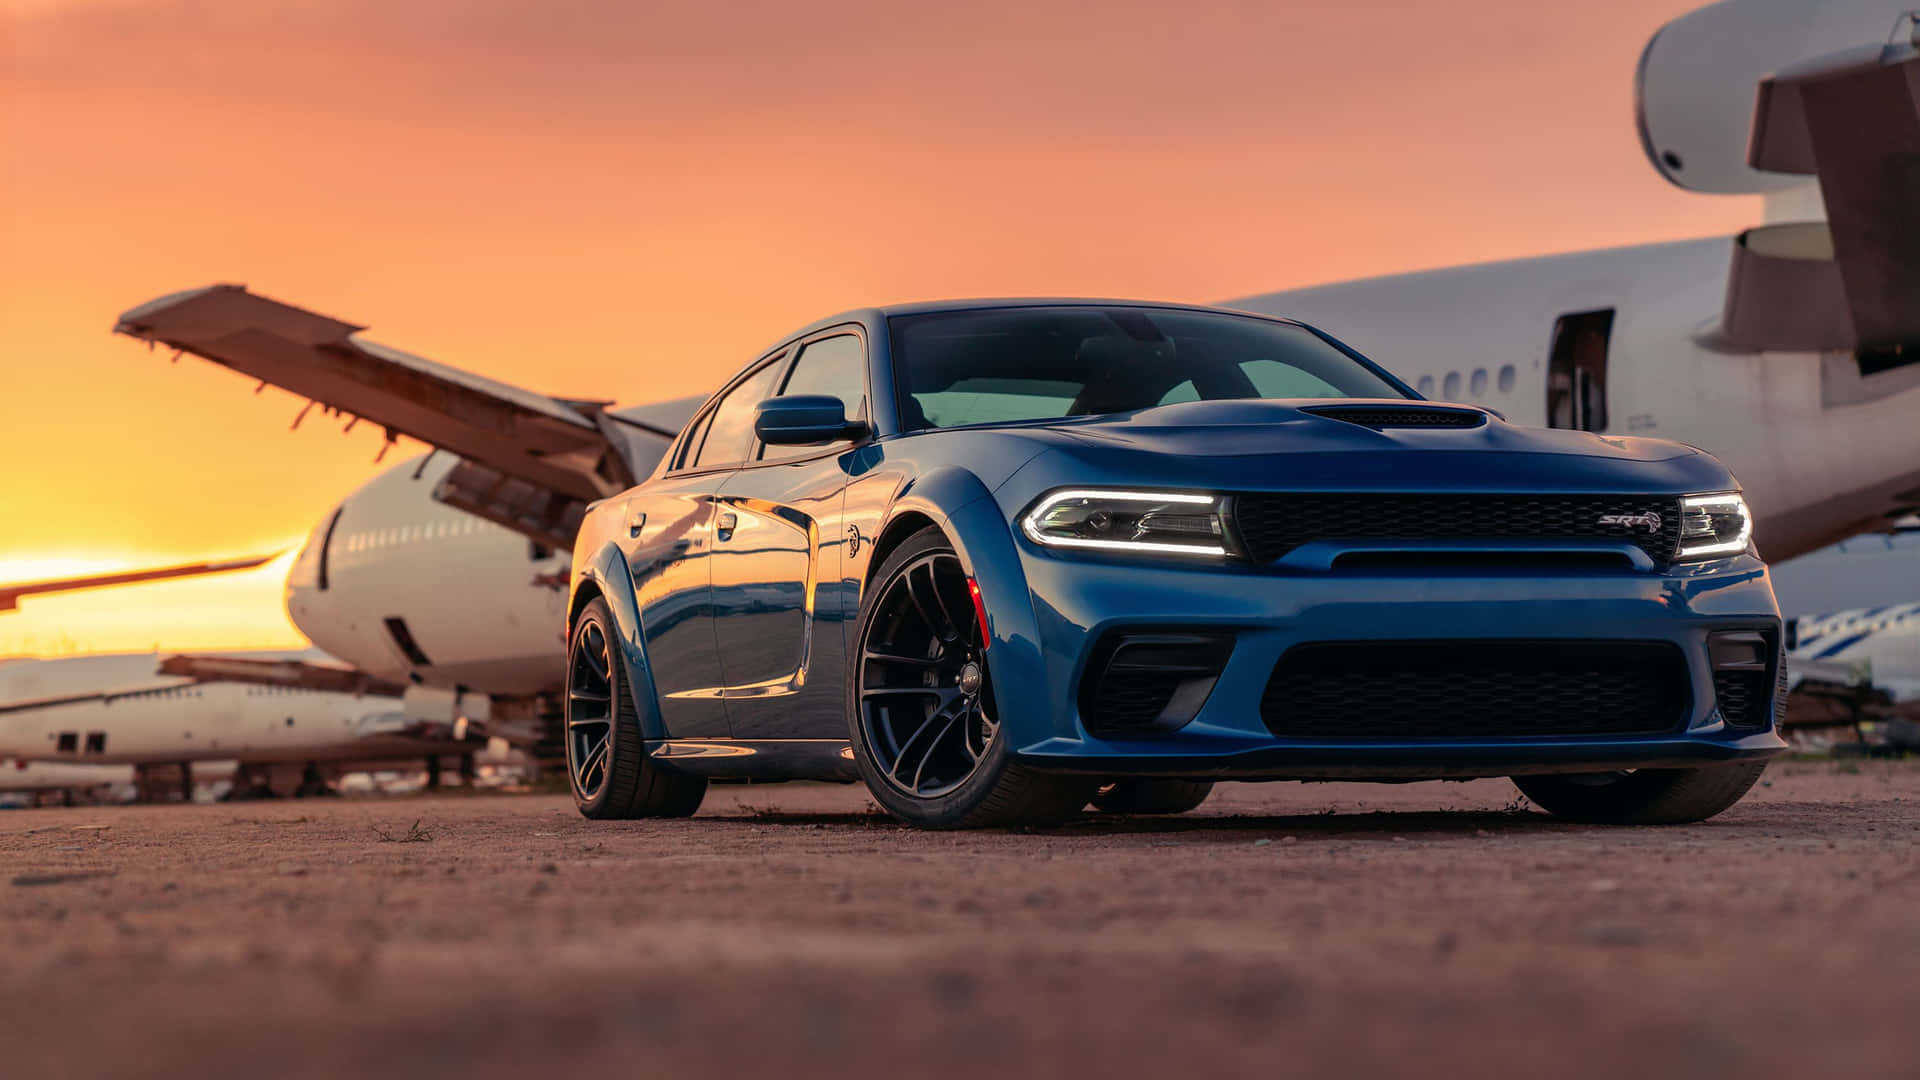 Caption: Thrilling Ride with Dodge Charger Wallpaper